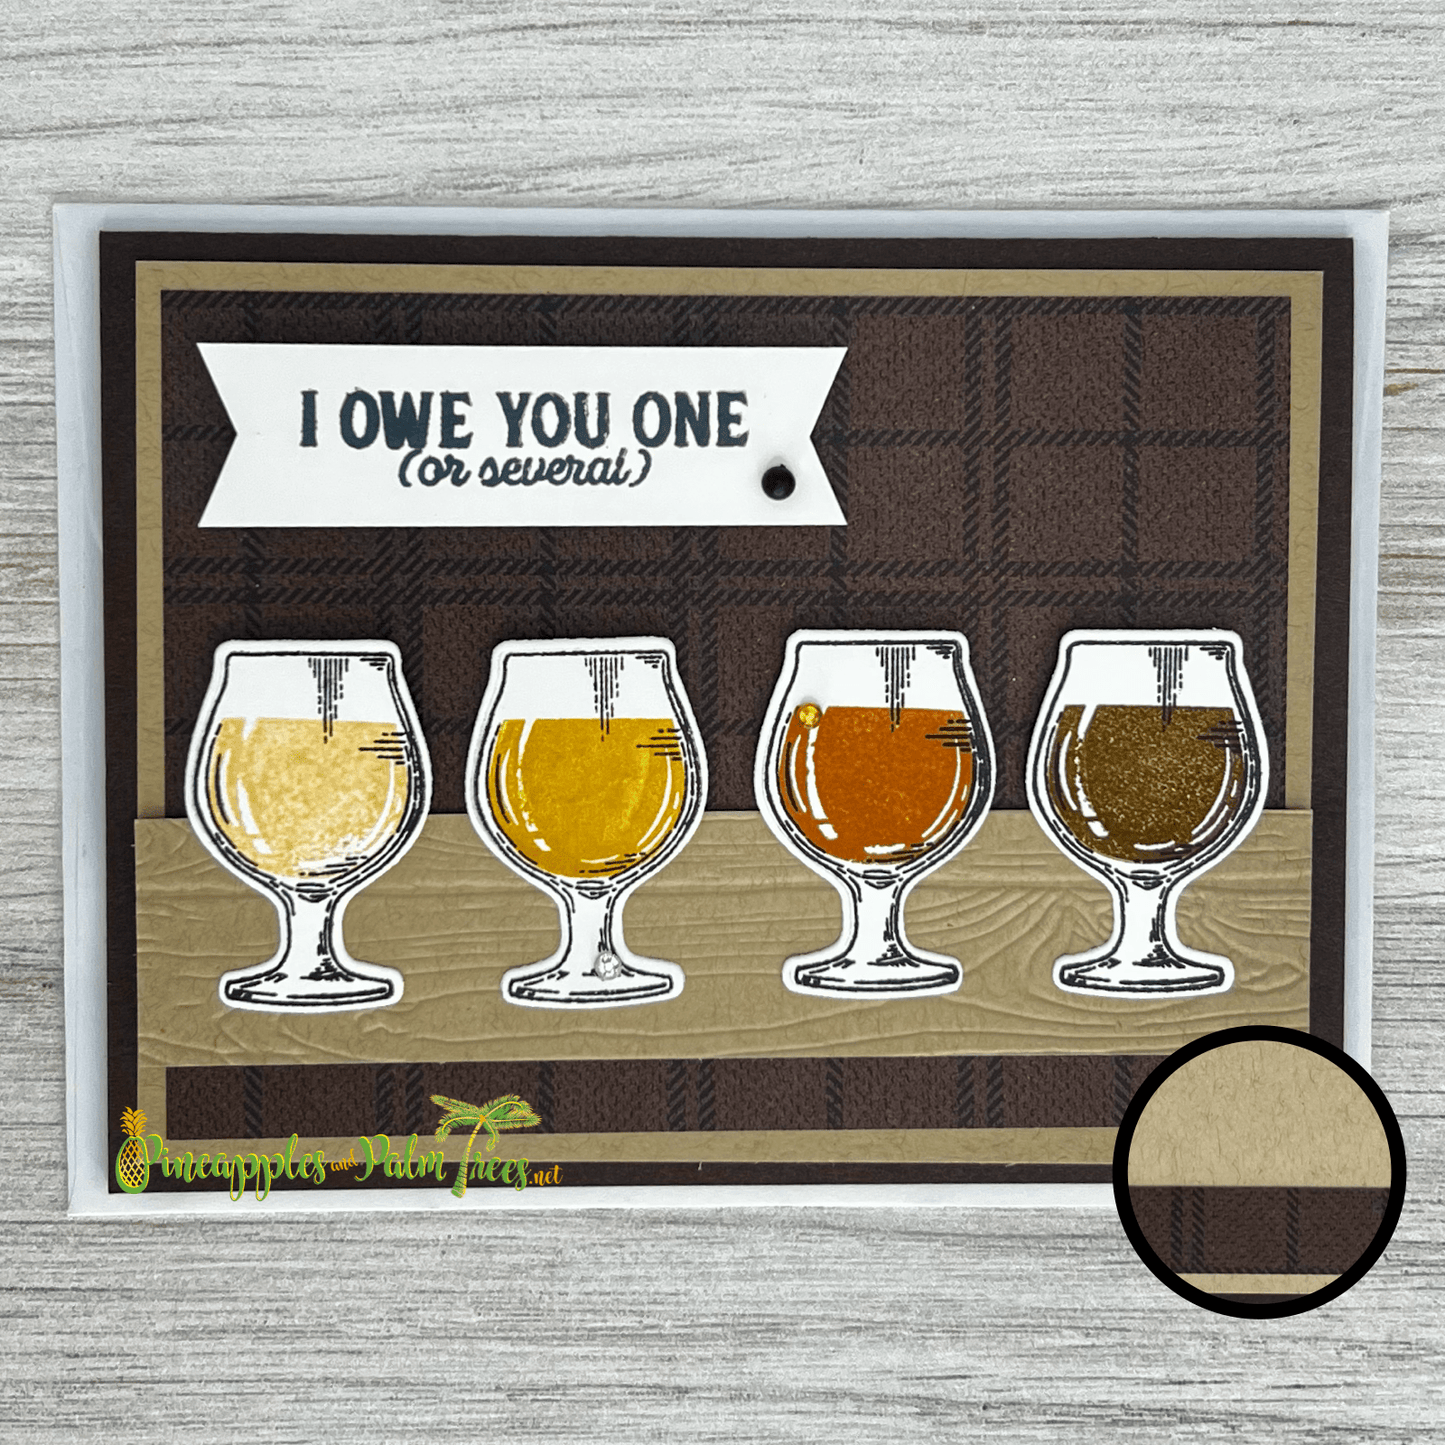 Greeting Card: I Owe You One (Or Several) - beer